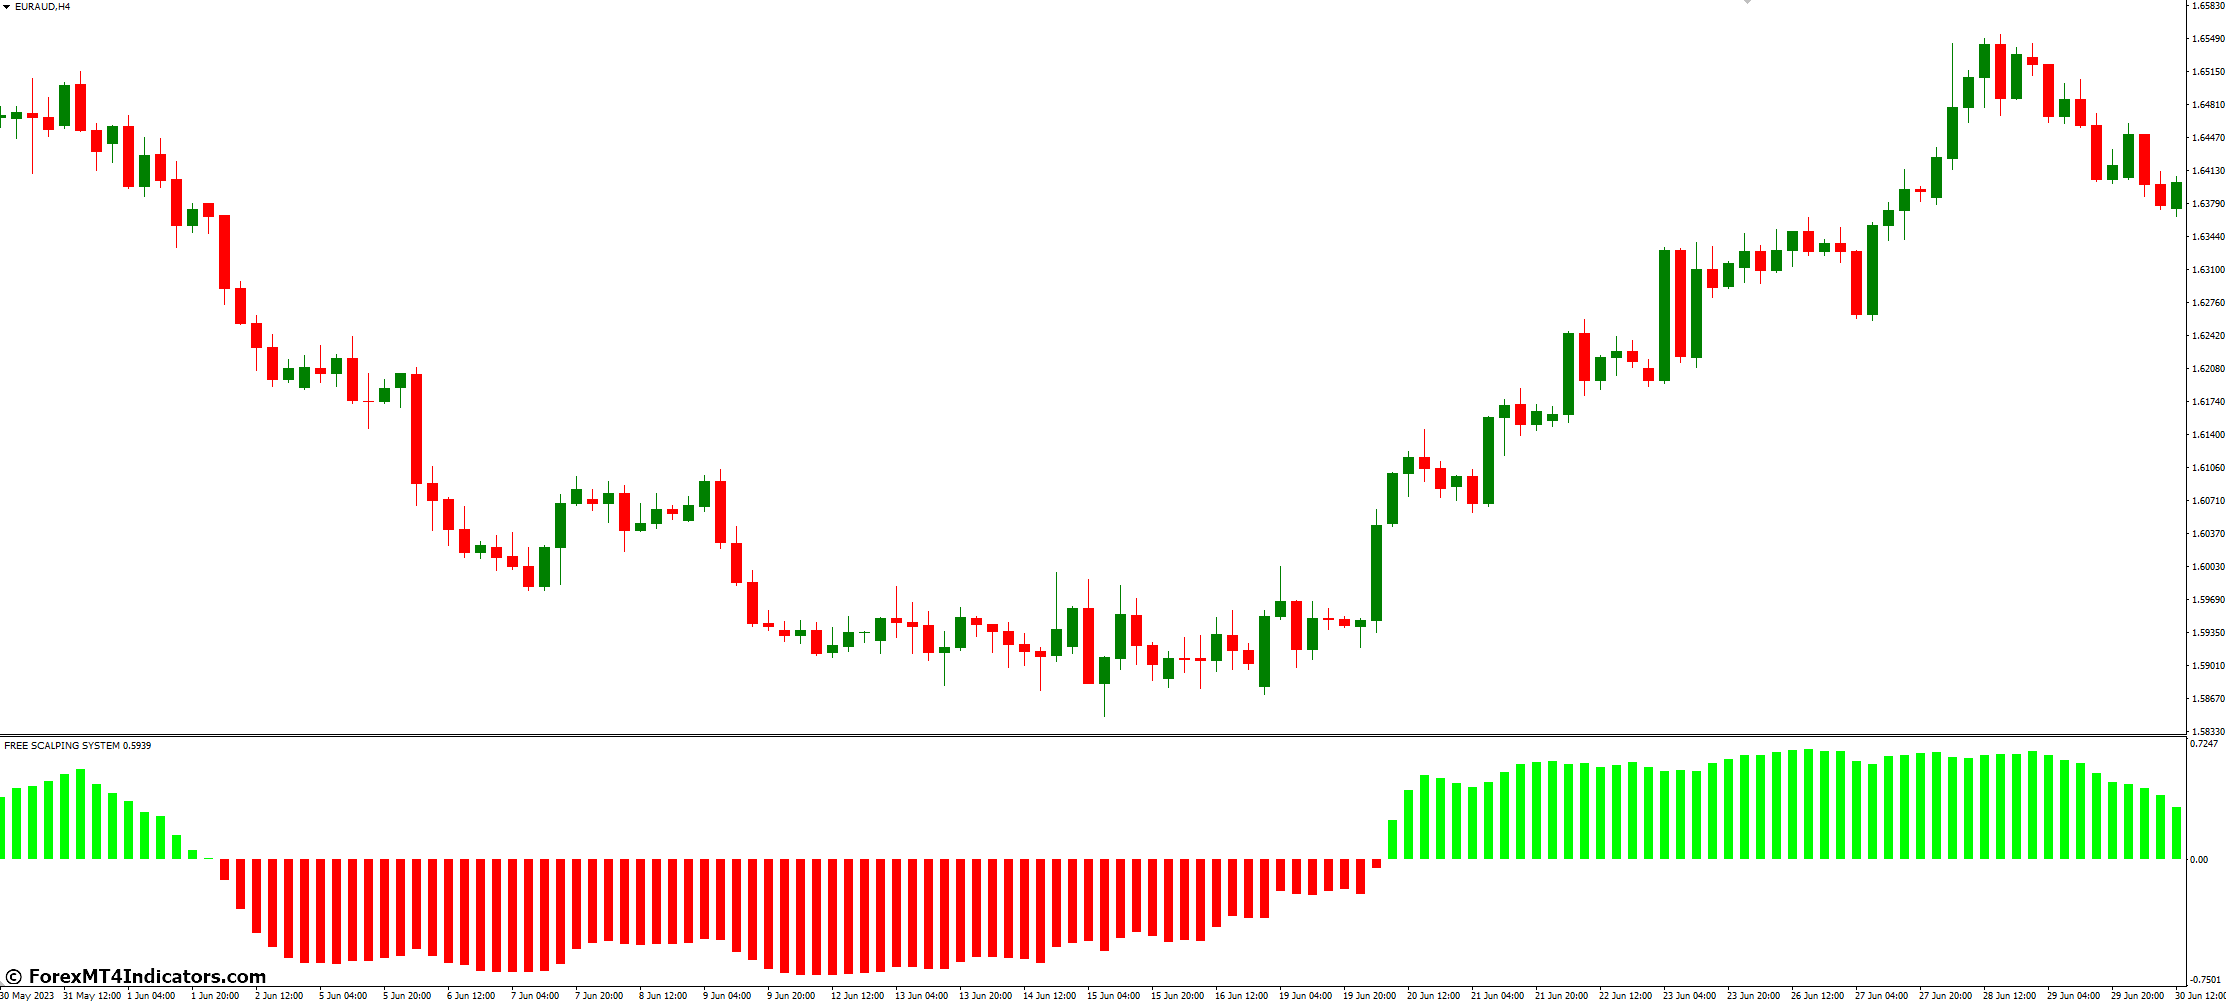 Practical Tips for Using Scalping Indicators